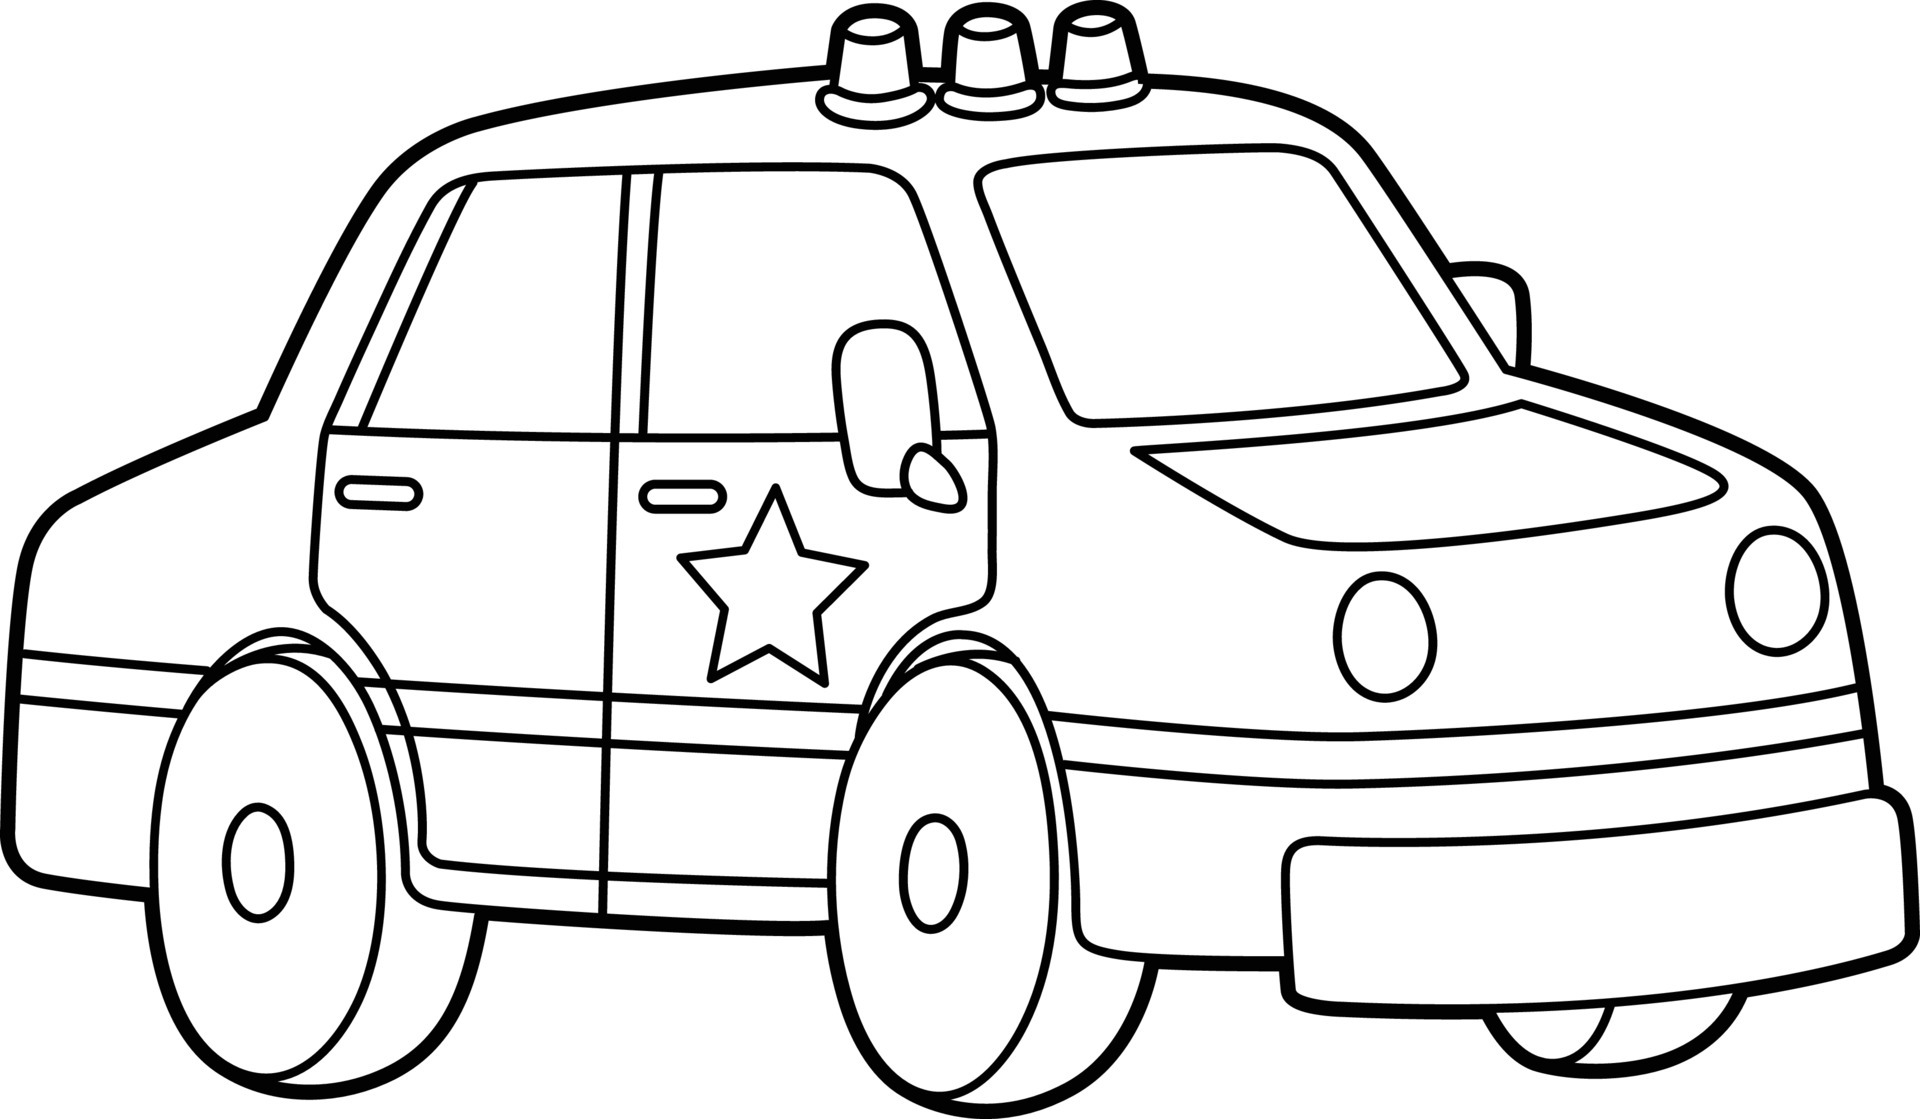 17 Car Coloring Pages  Free Printable Word PDF PNG JPEG EPS Format  Download